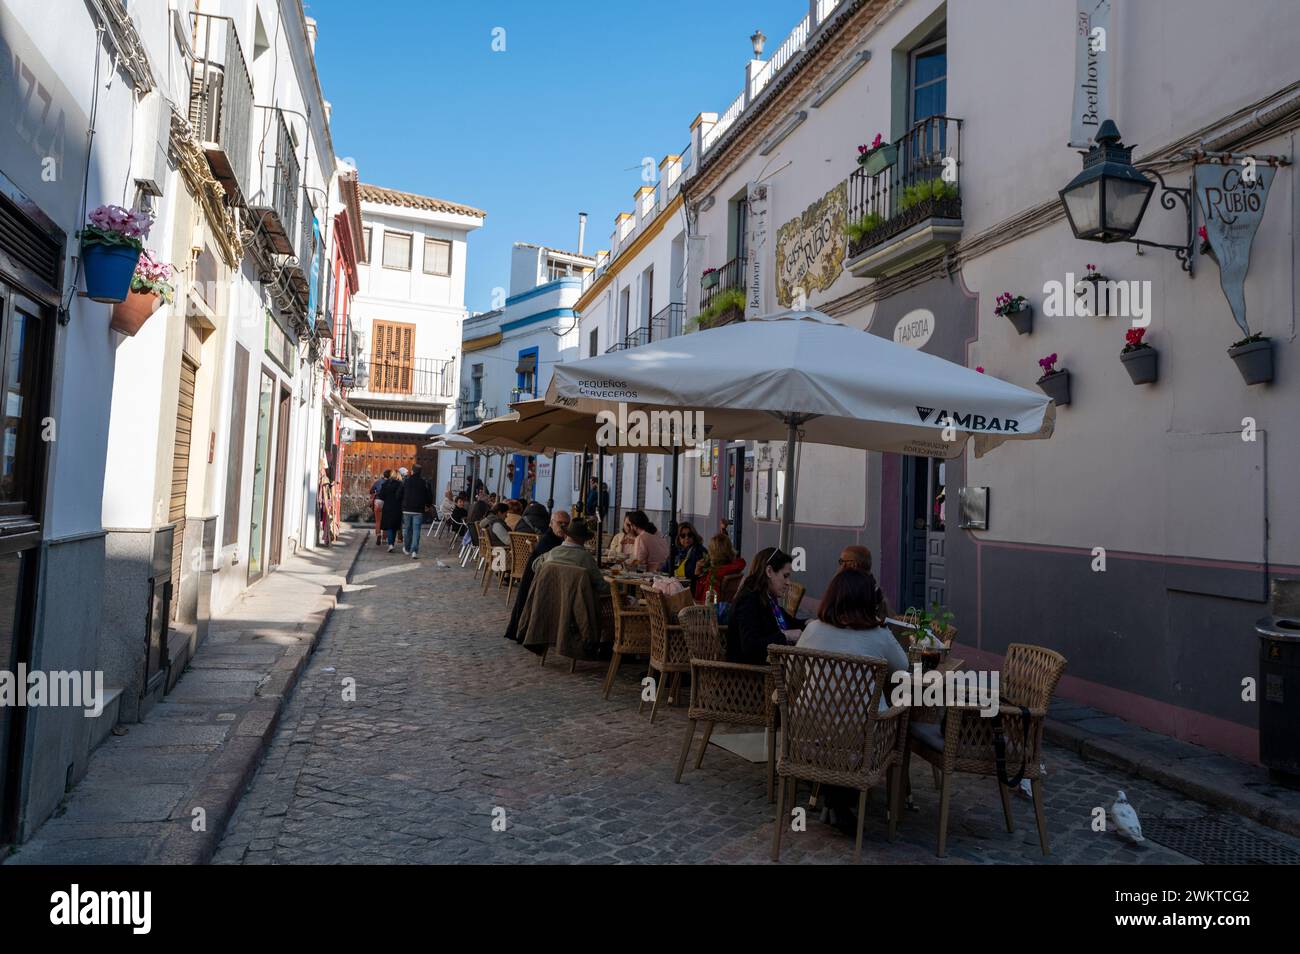 An outdoor restaurant scene near the Puerta de Almodovar (Almodovar gate) in the old Jewish quarter of the historic city of Cordoba in Andalusia, south Stock Photo